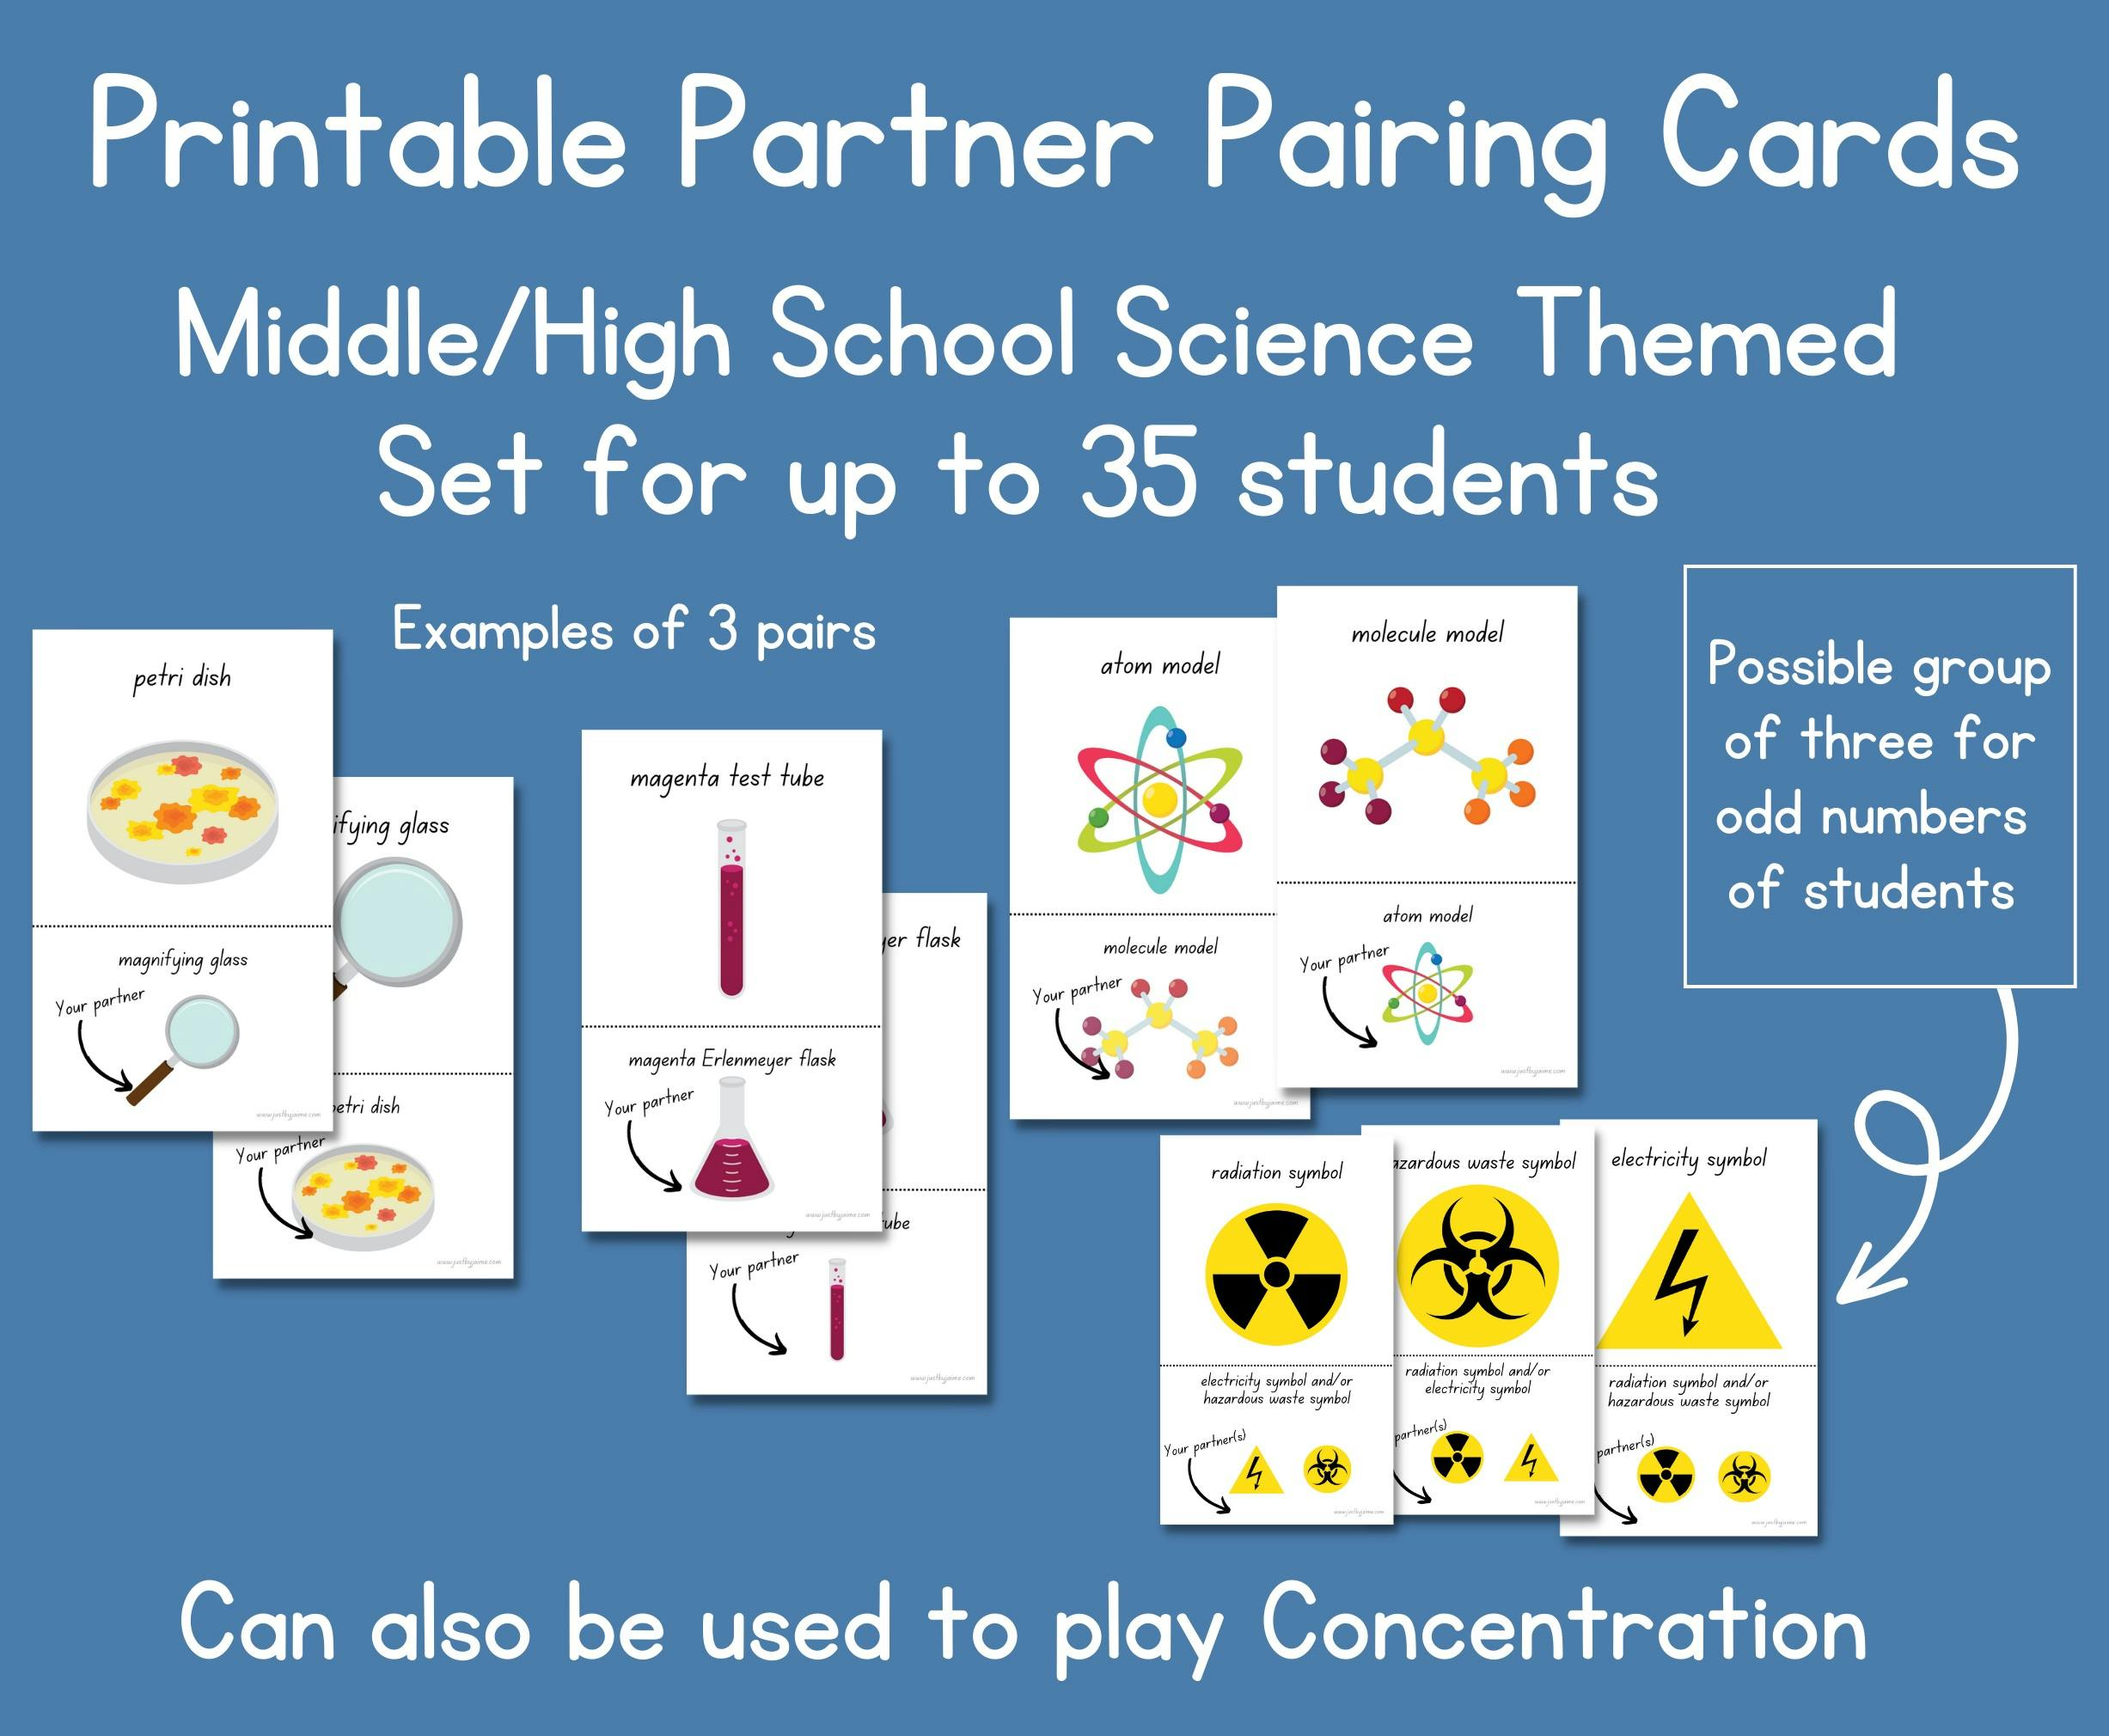 Printable partner pairing cards for science